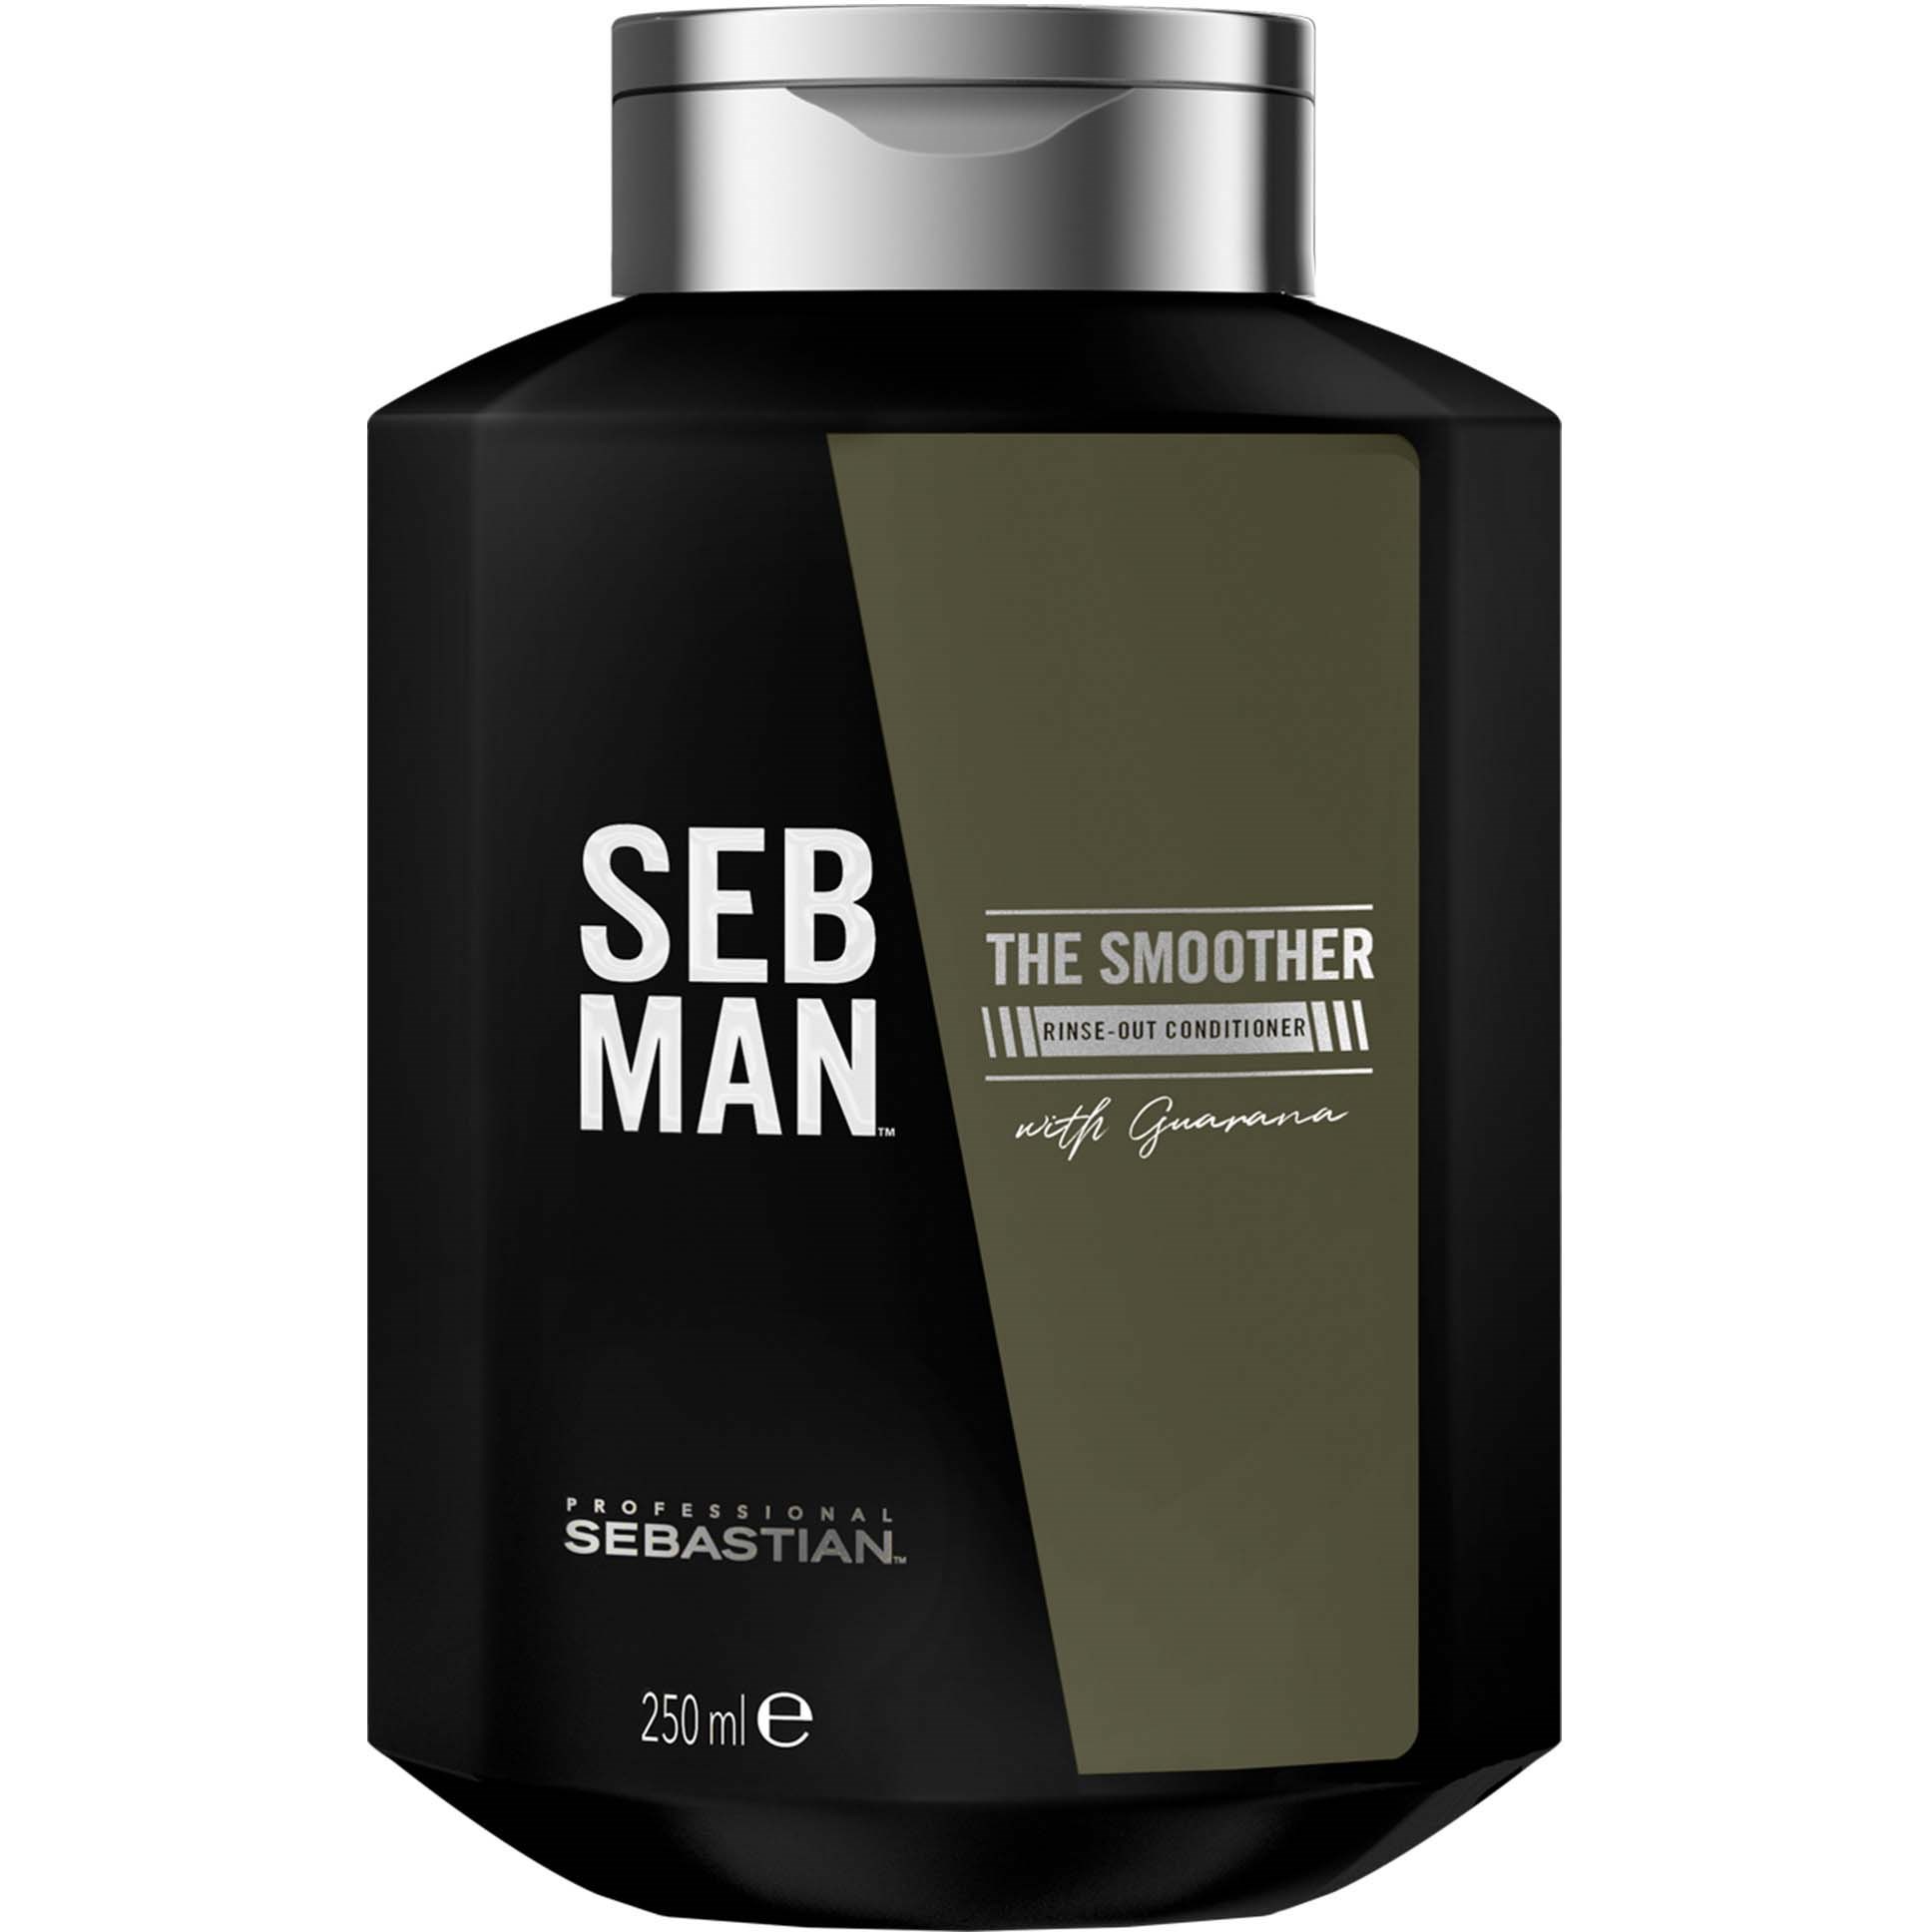 Bilde av Seb Man The Smoother Rinse-out Conditioner 250 Ml